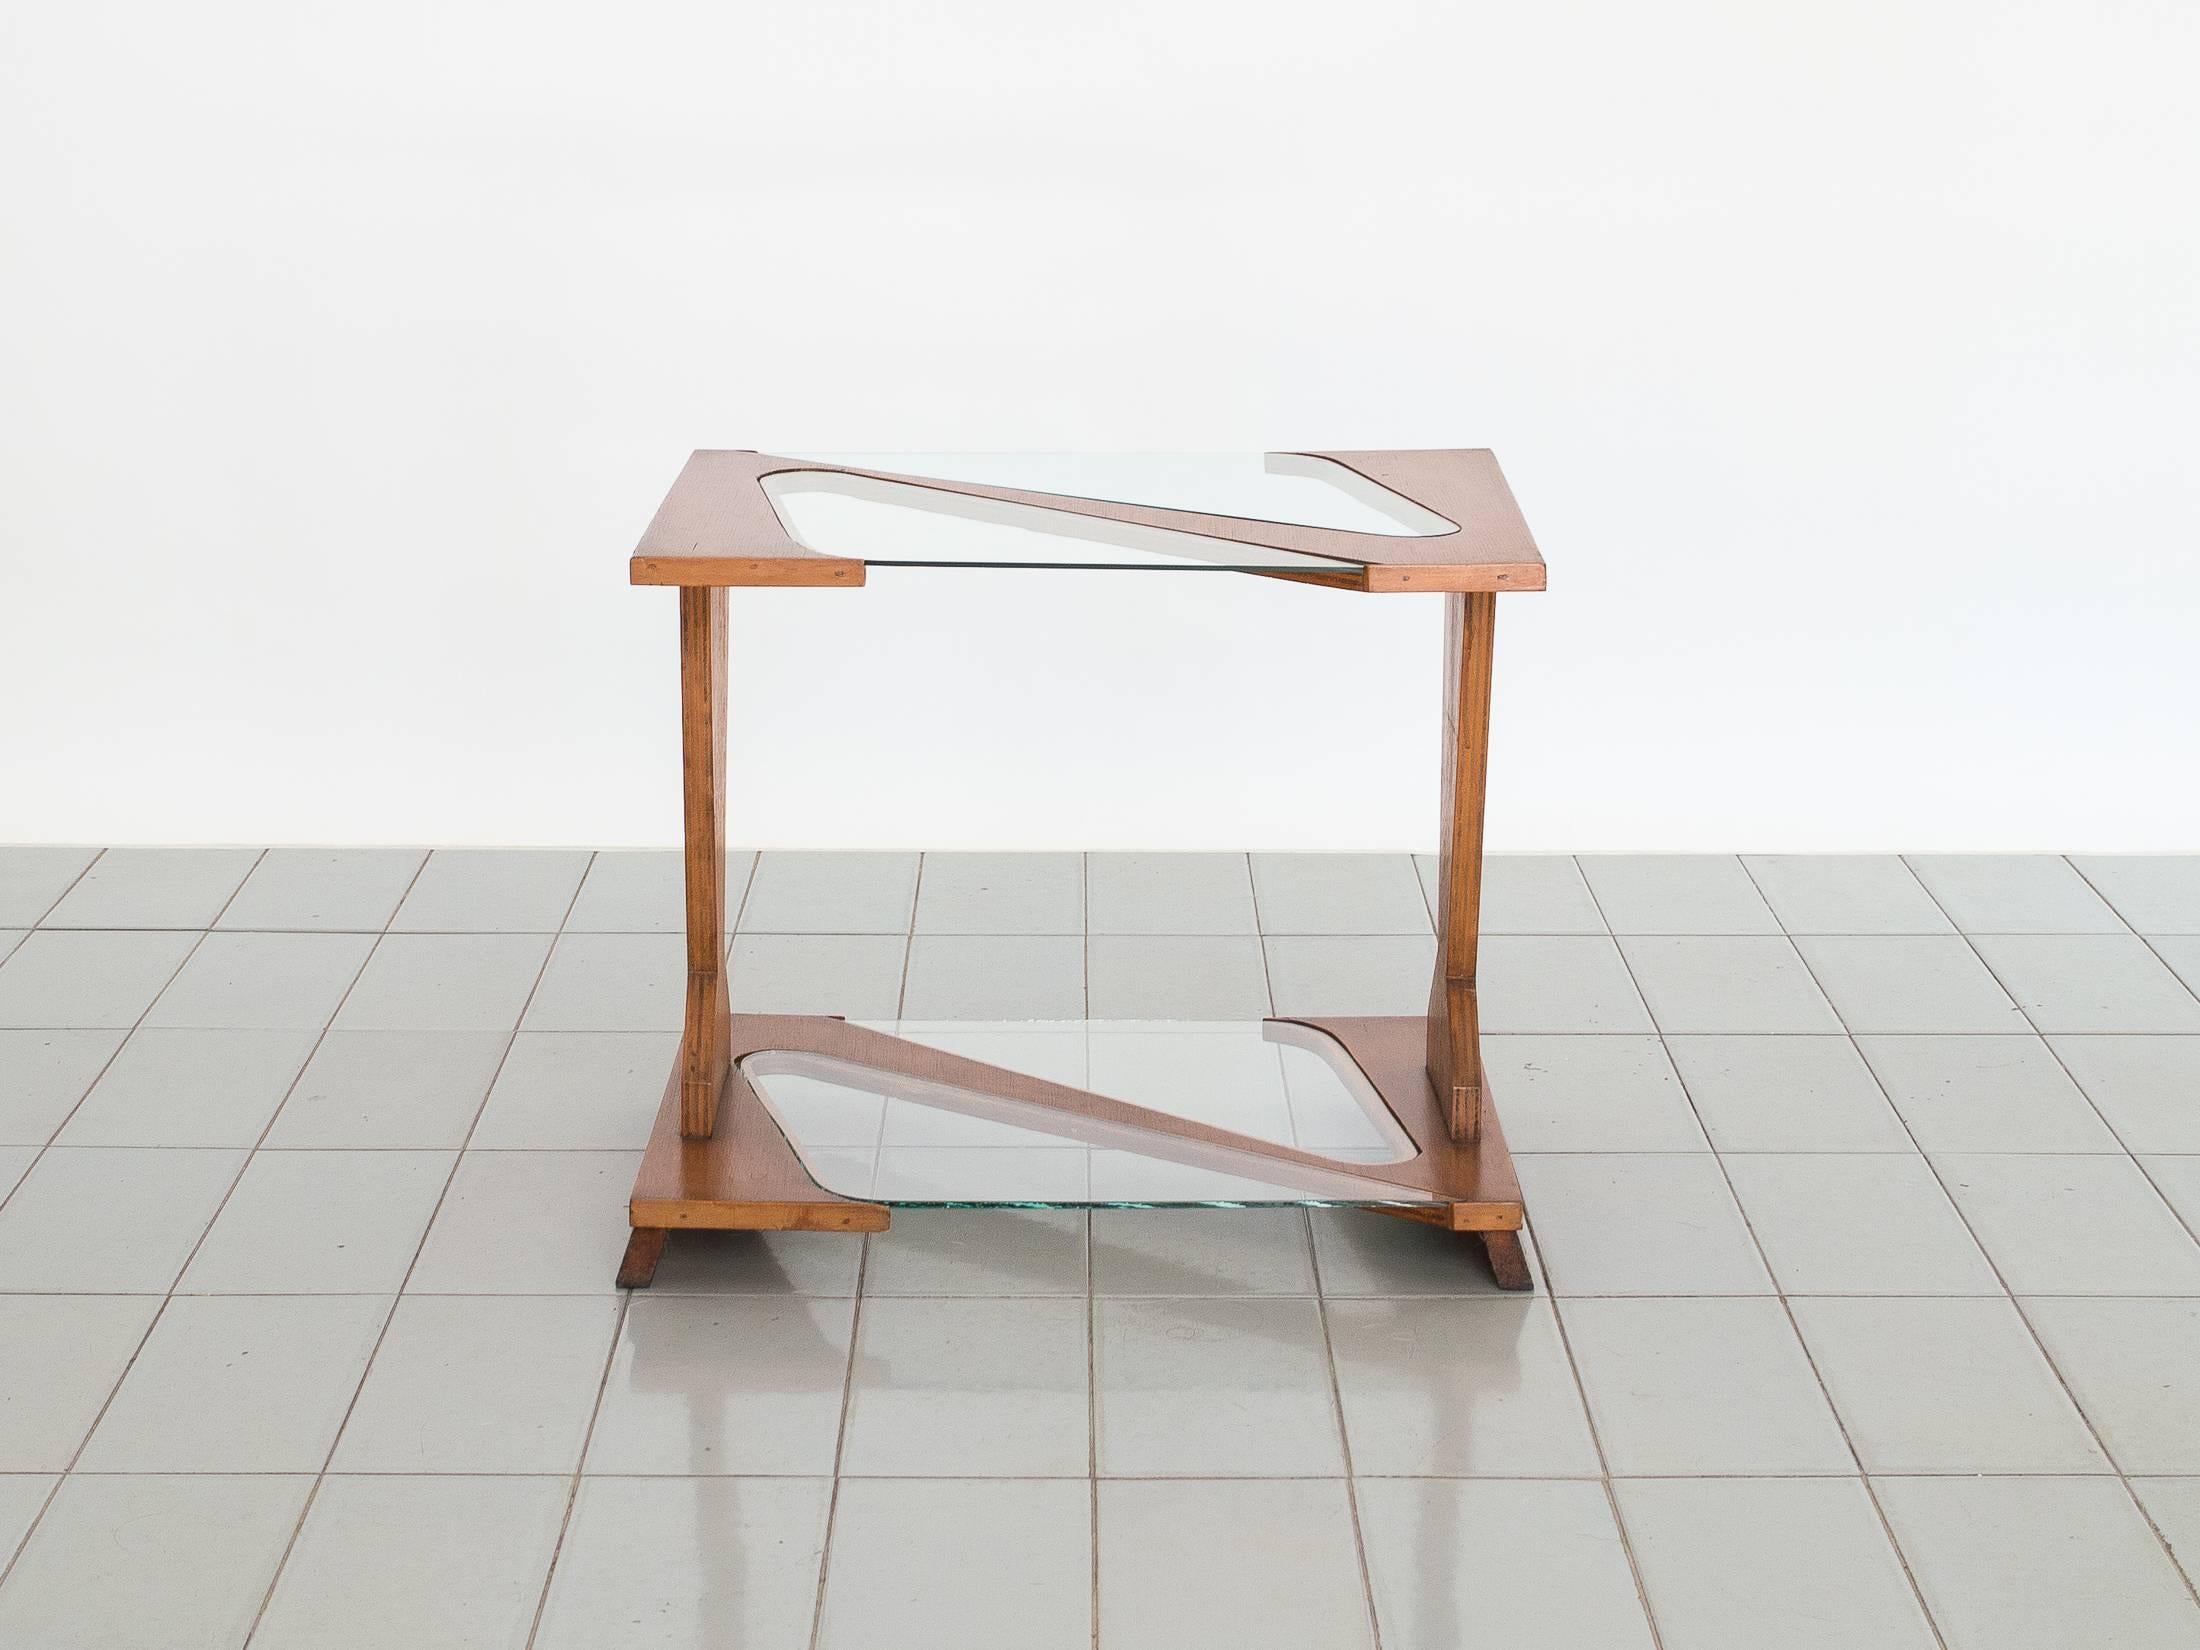 Unique plywood side table with glass inserts, designed by Zanine Caldas in the early 1950s.